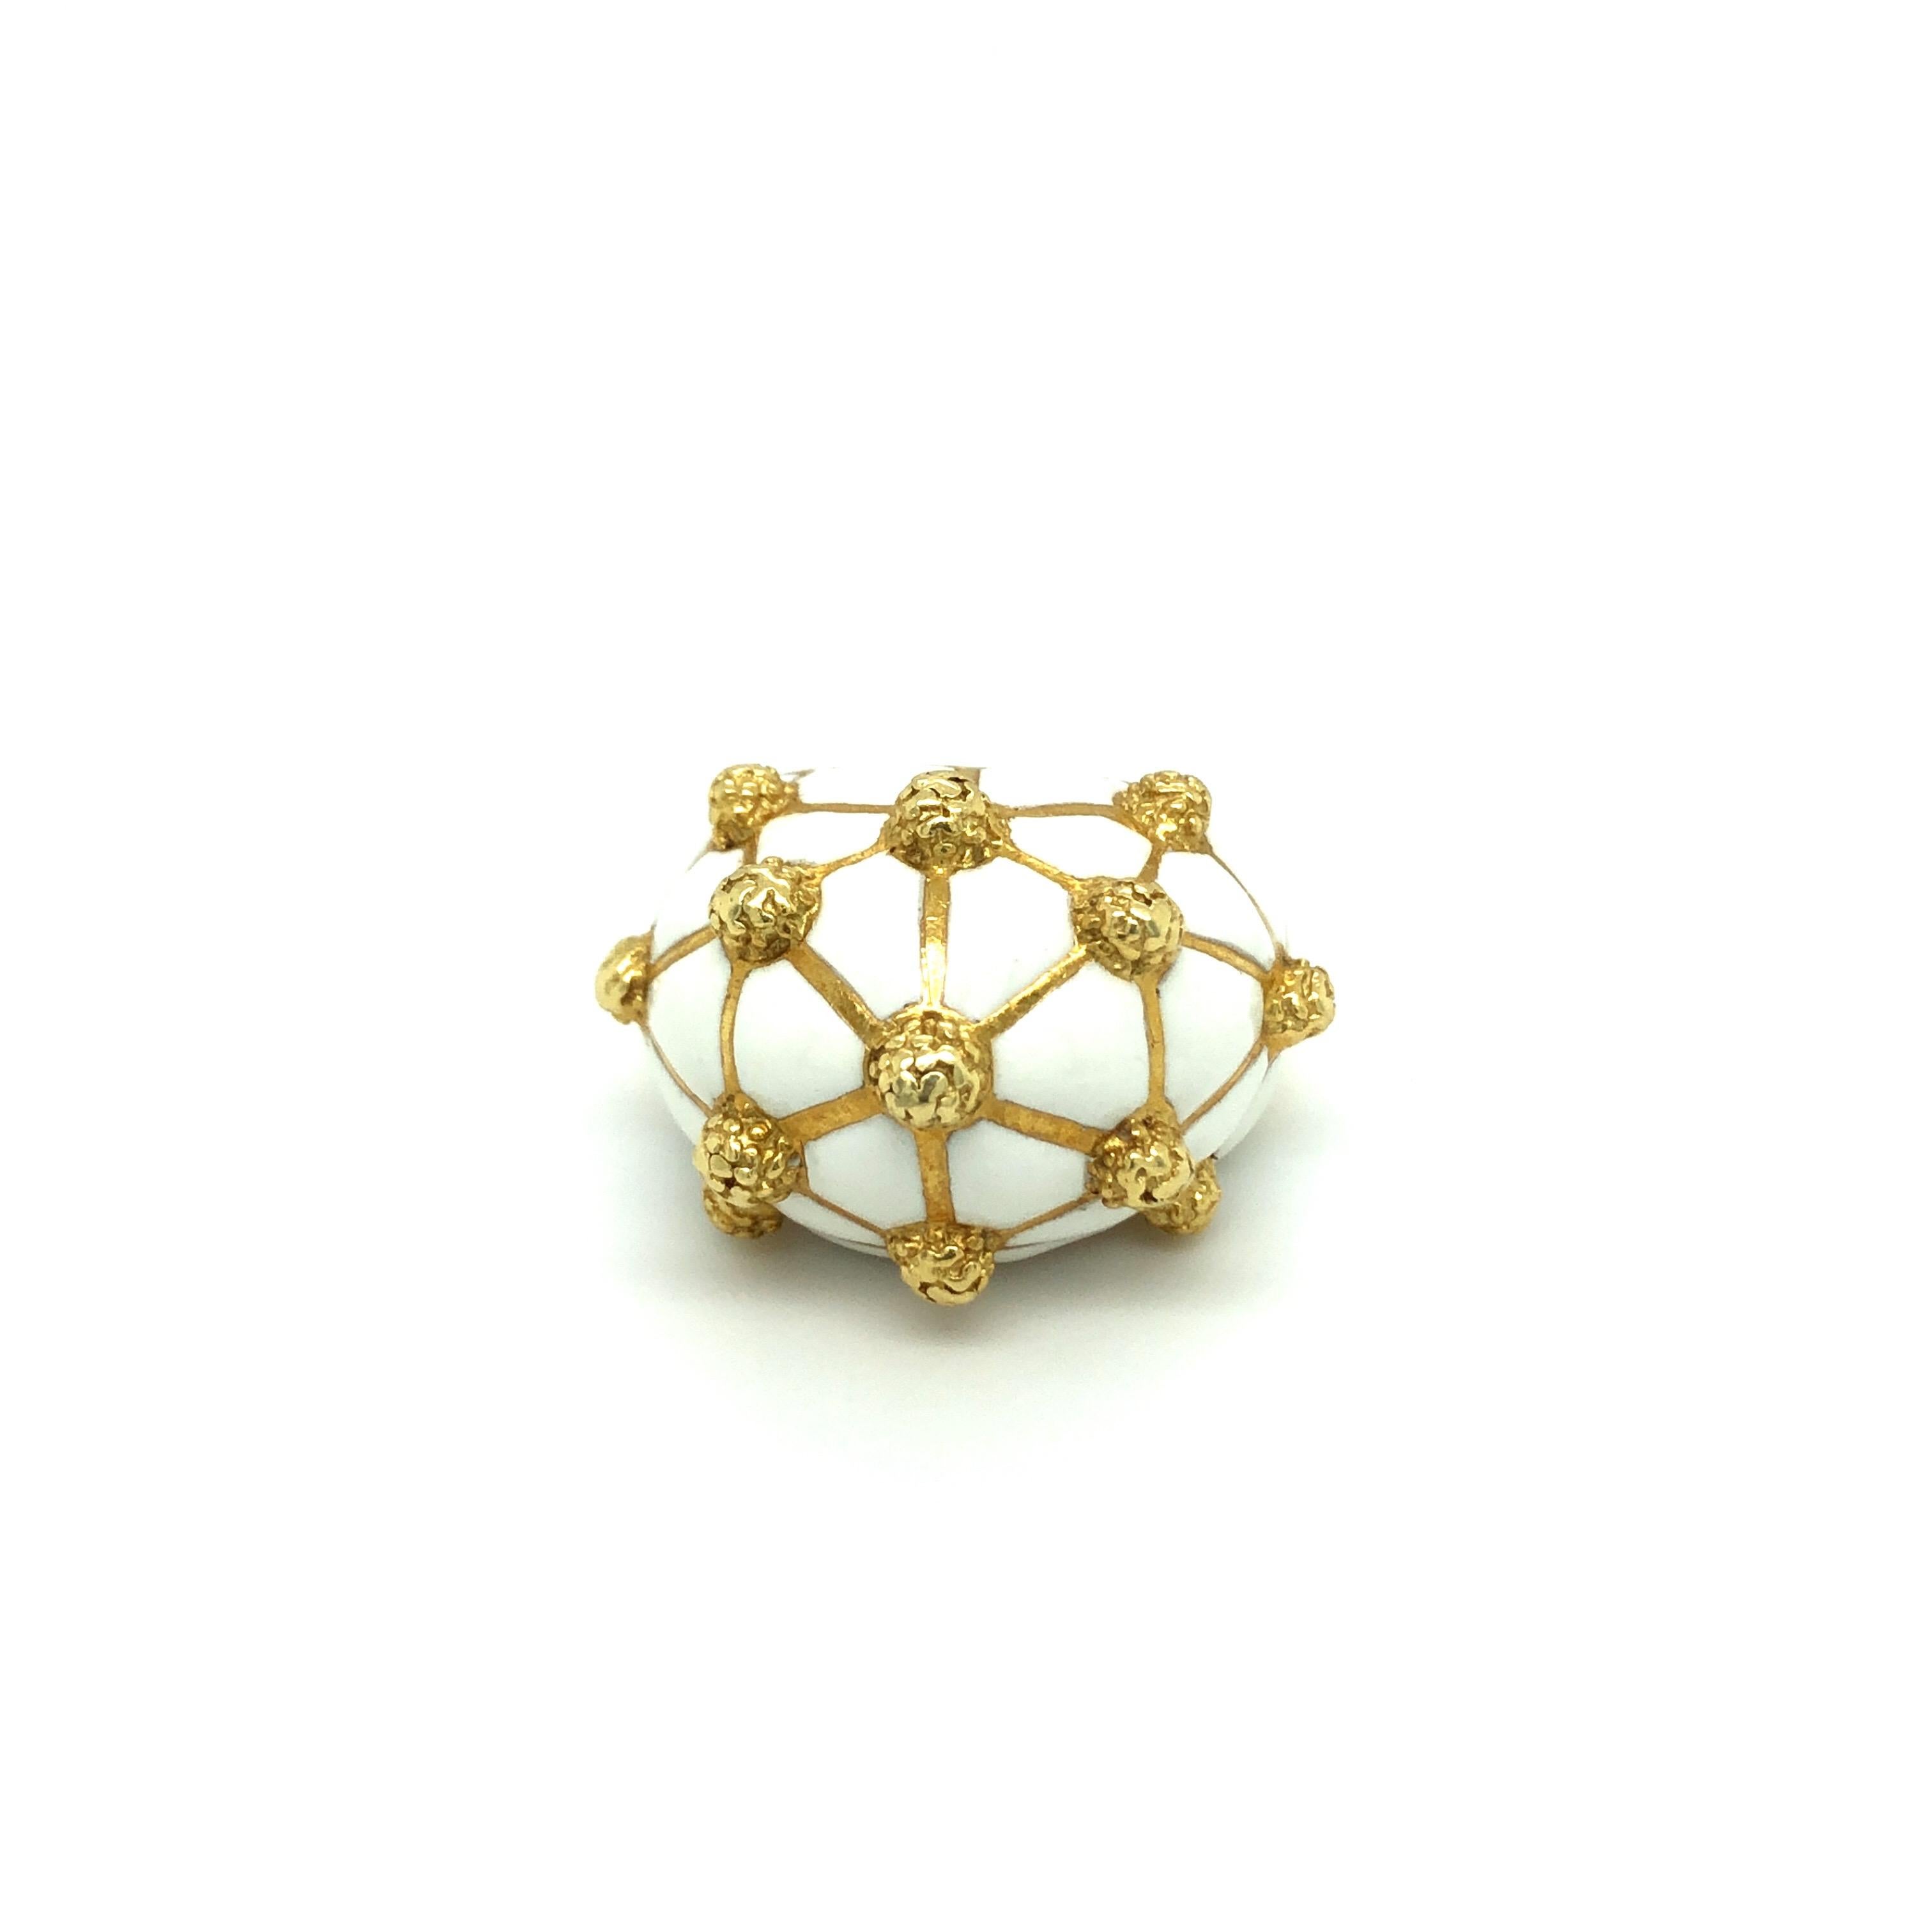 David Webb enamel 18 karat gold geodesic dome ring from the 57th Street collection.
This fabulous cocktail ring is crafted in 18 karat yellow gold and emblazoned with white enamel. The surface of the dome is scattered with raised structured gold